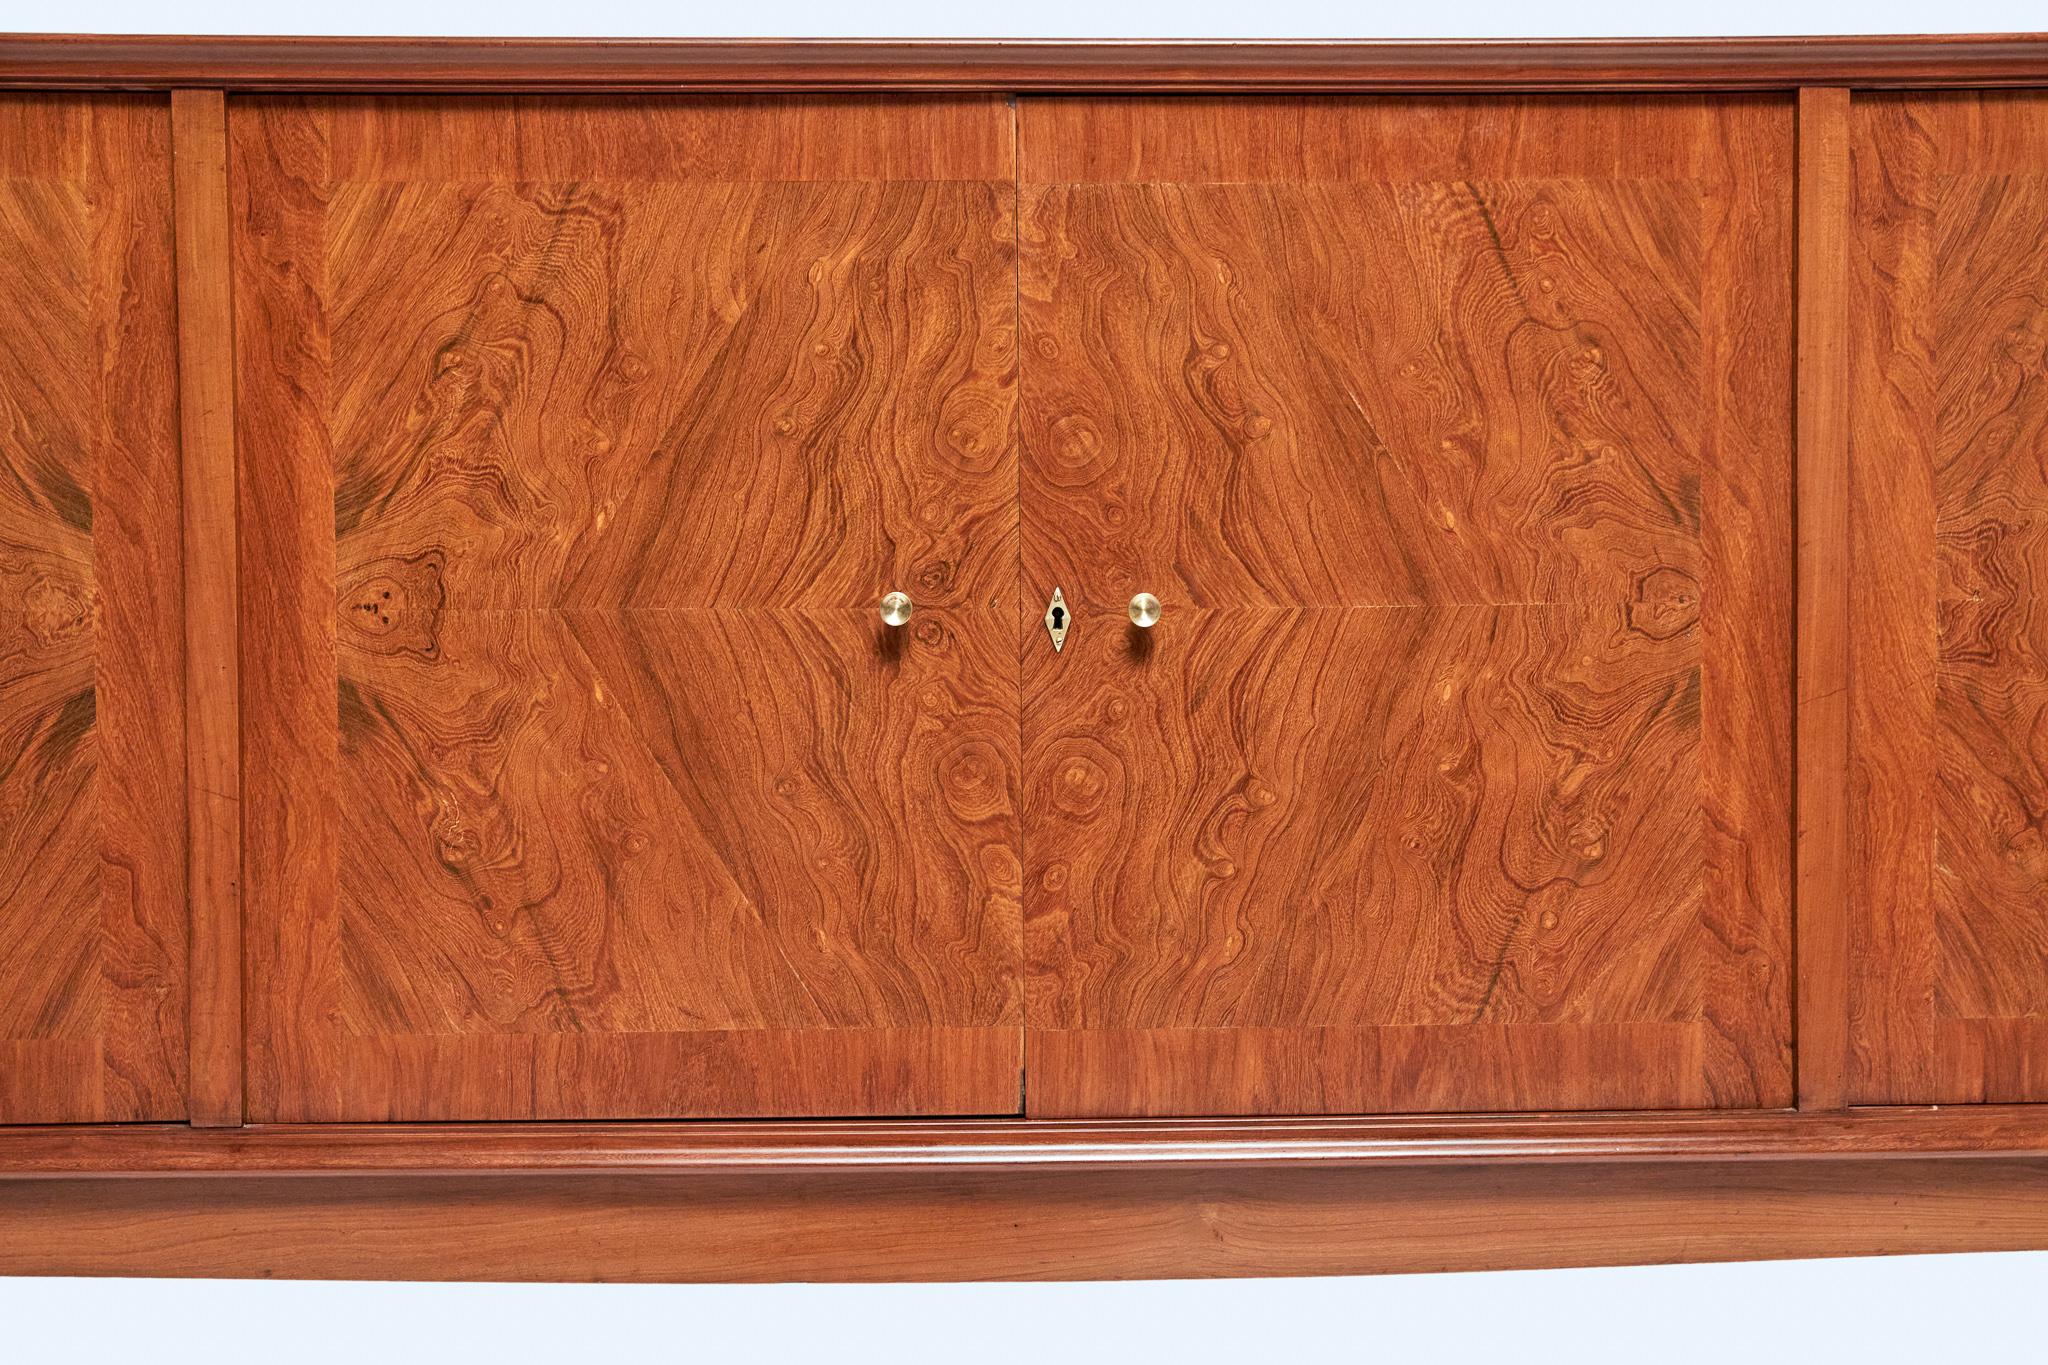 Other Mid-Century Modern Credenza in Caviuna Hardwood by Giuseppe Scapinelli, 1956 For Sale